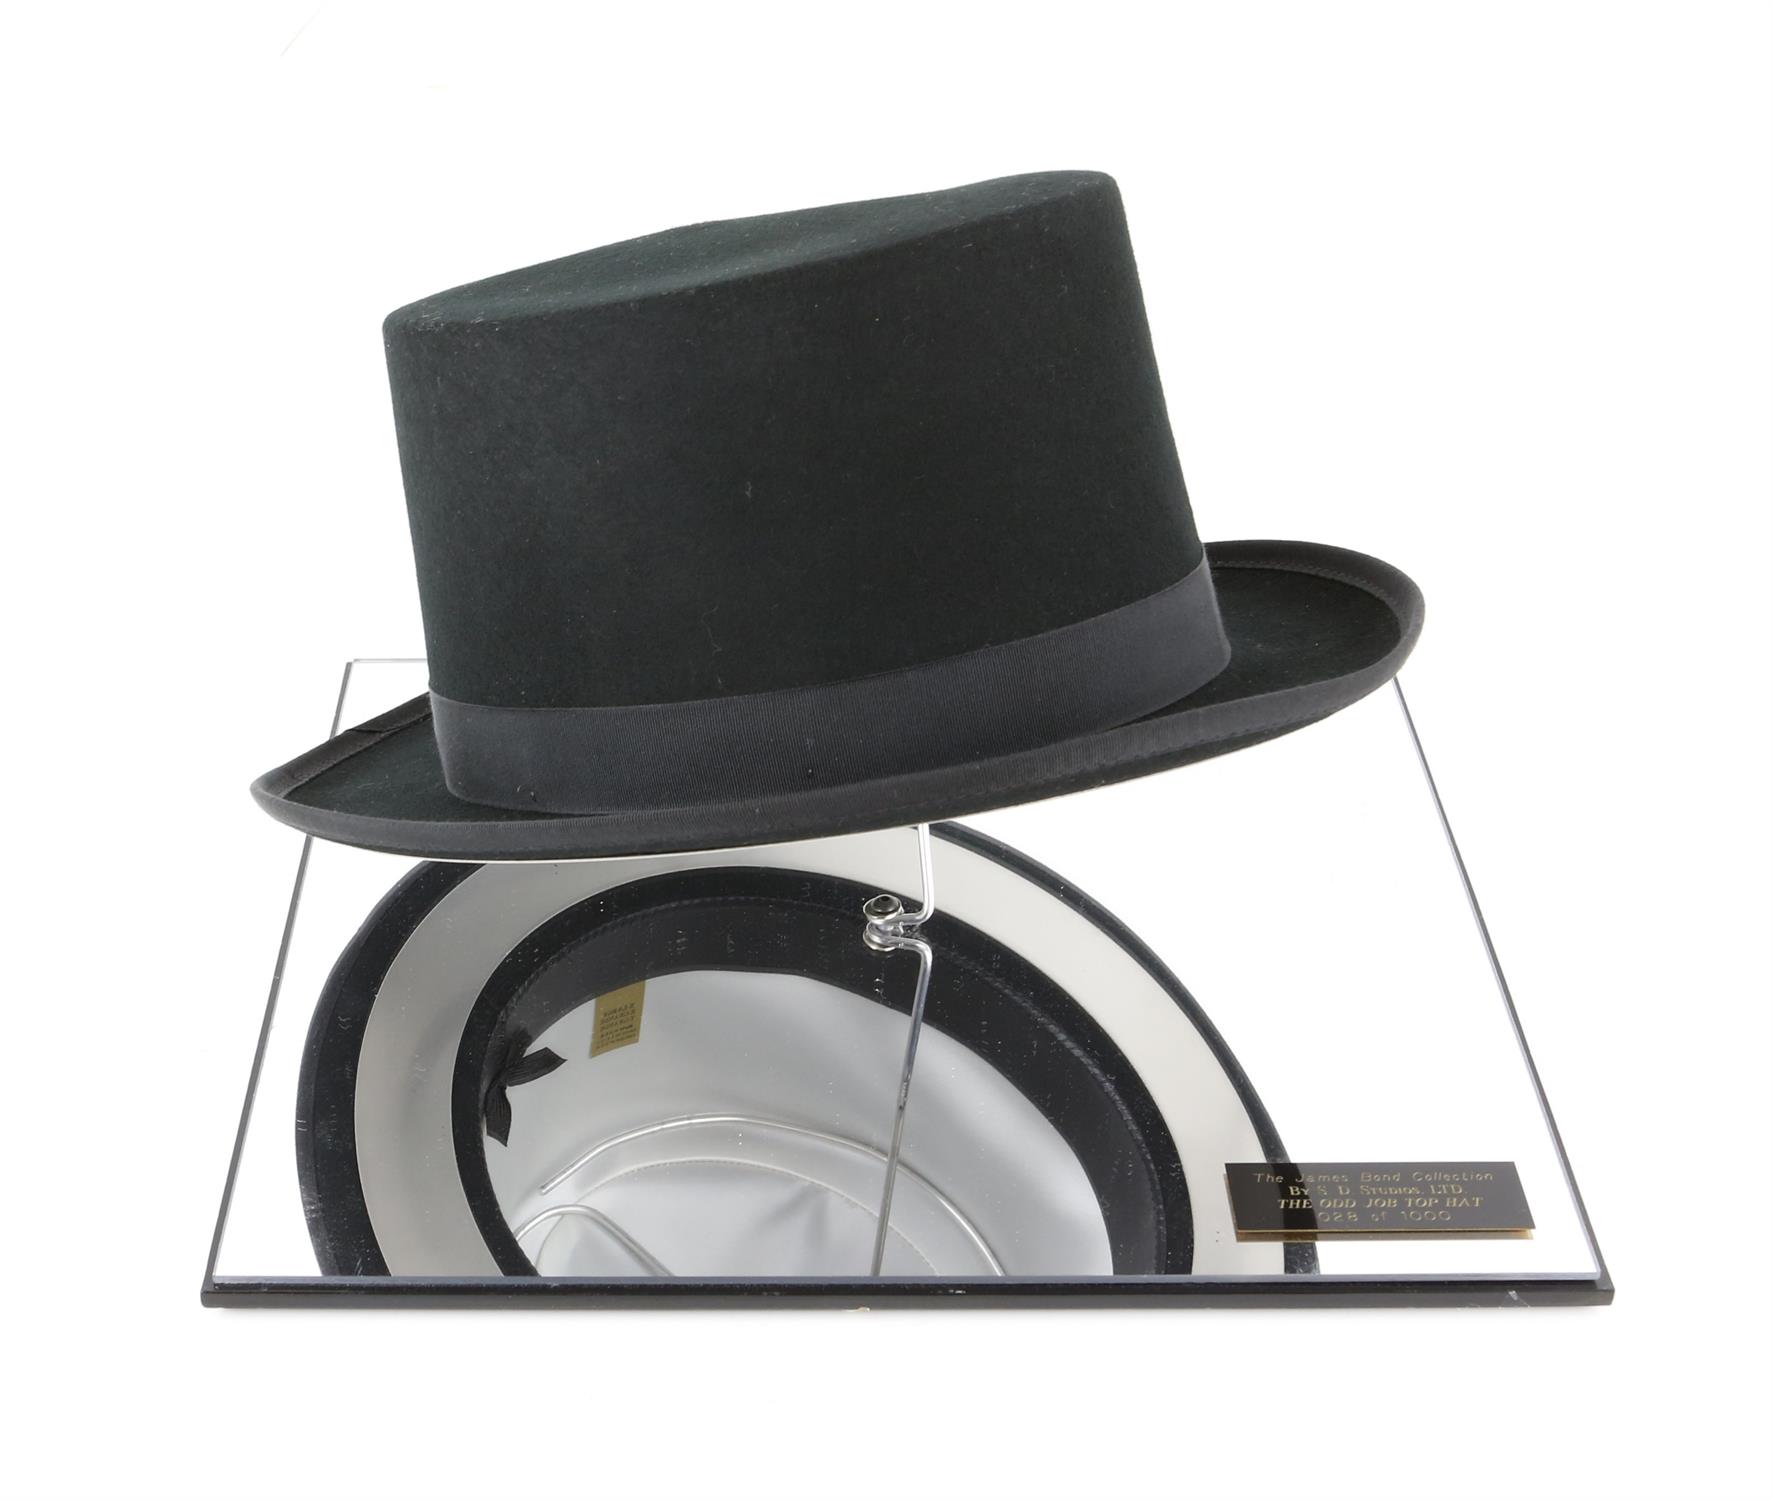 The James Bond Collection - A replica Top Hat as worn by Odd Job in Goldfinger, manufactured by S.D. - Image 2 of 5